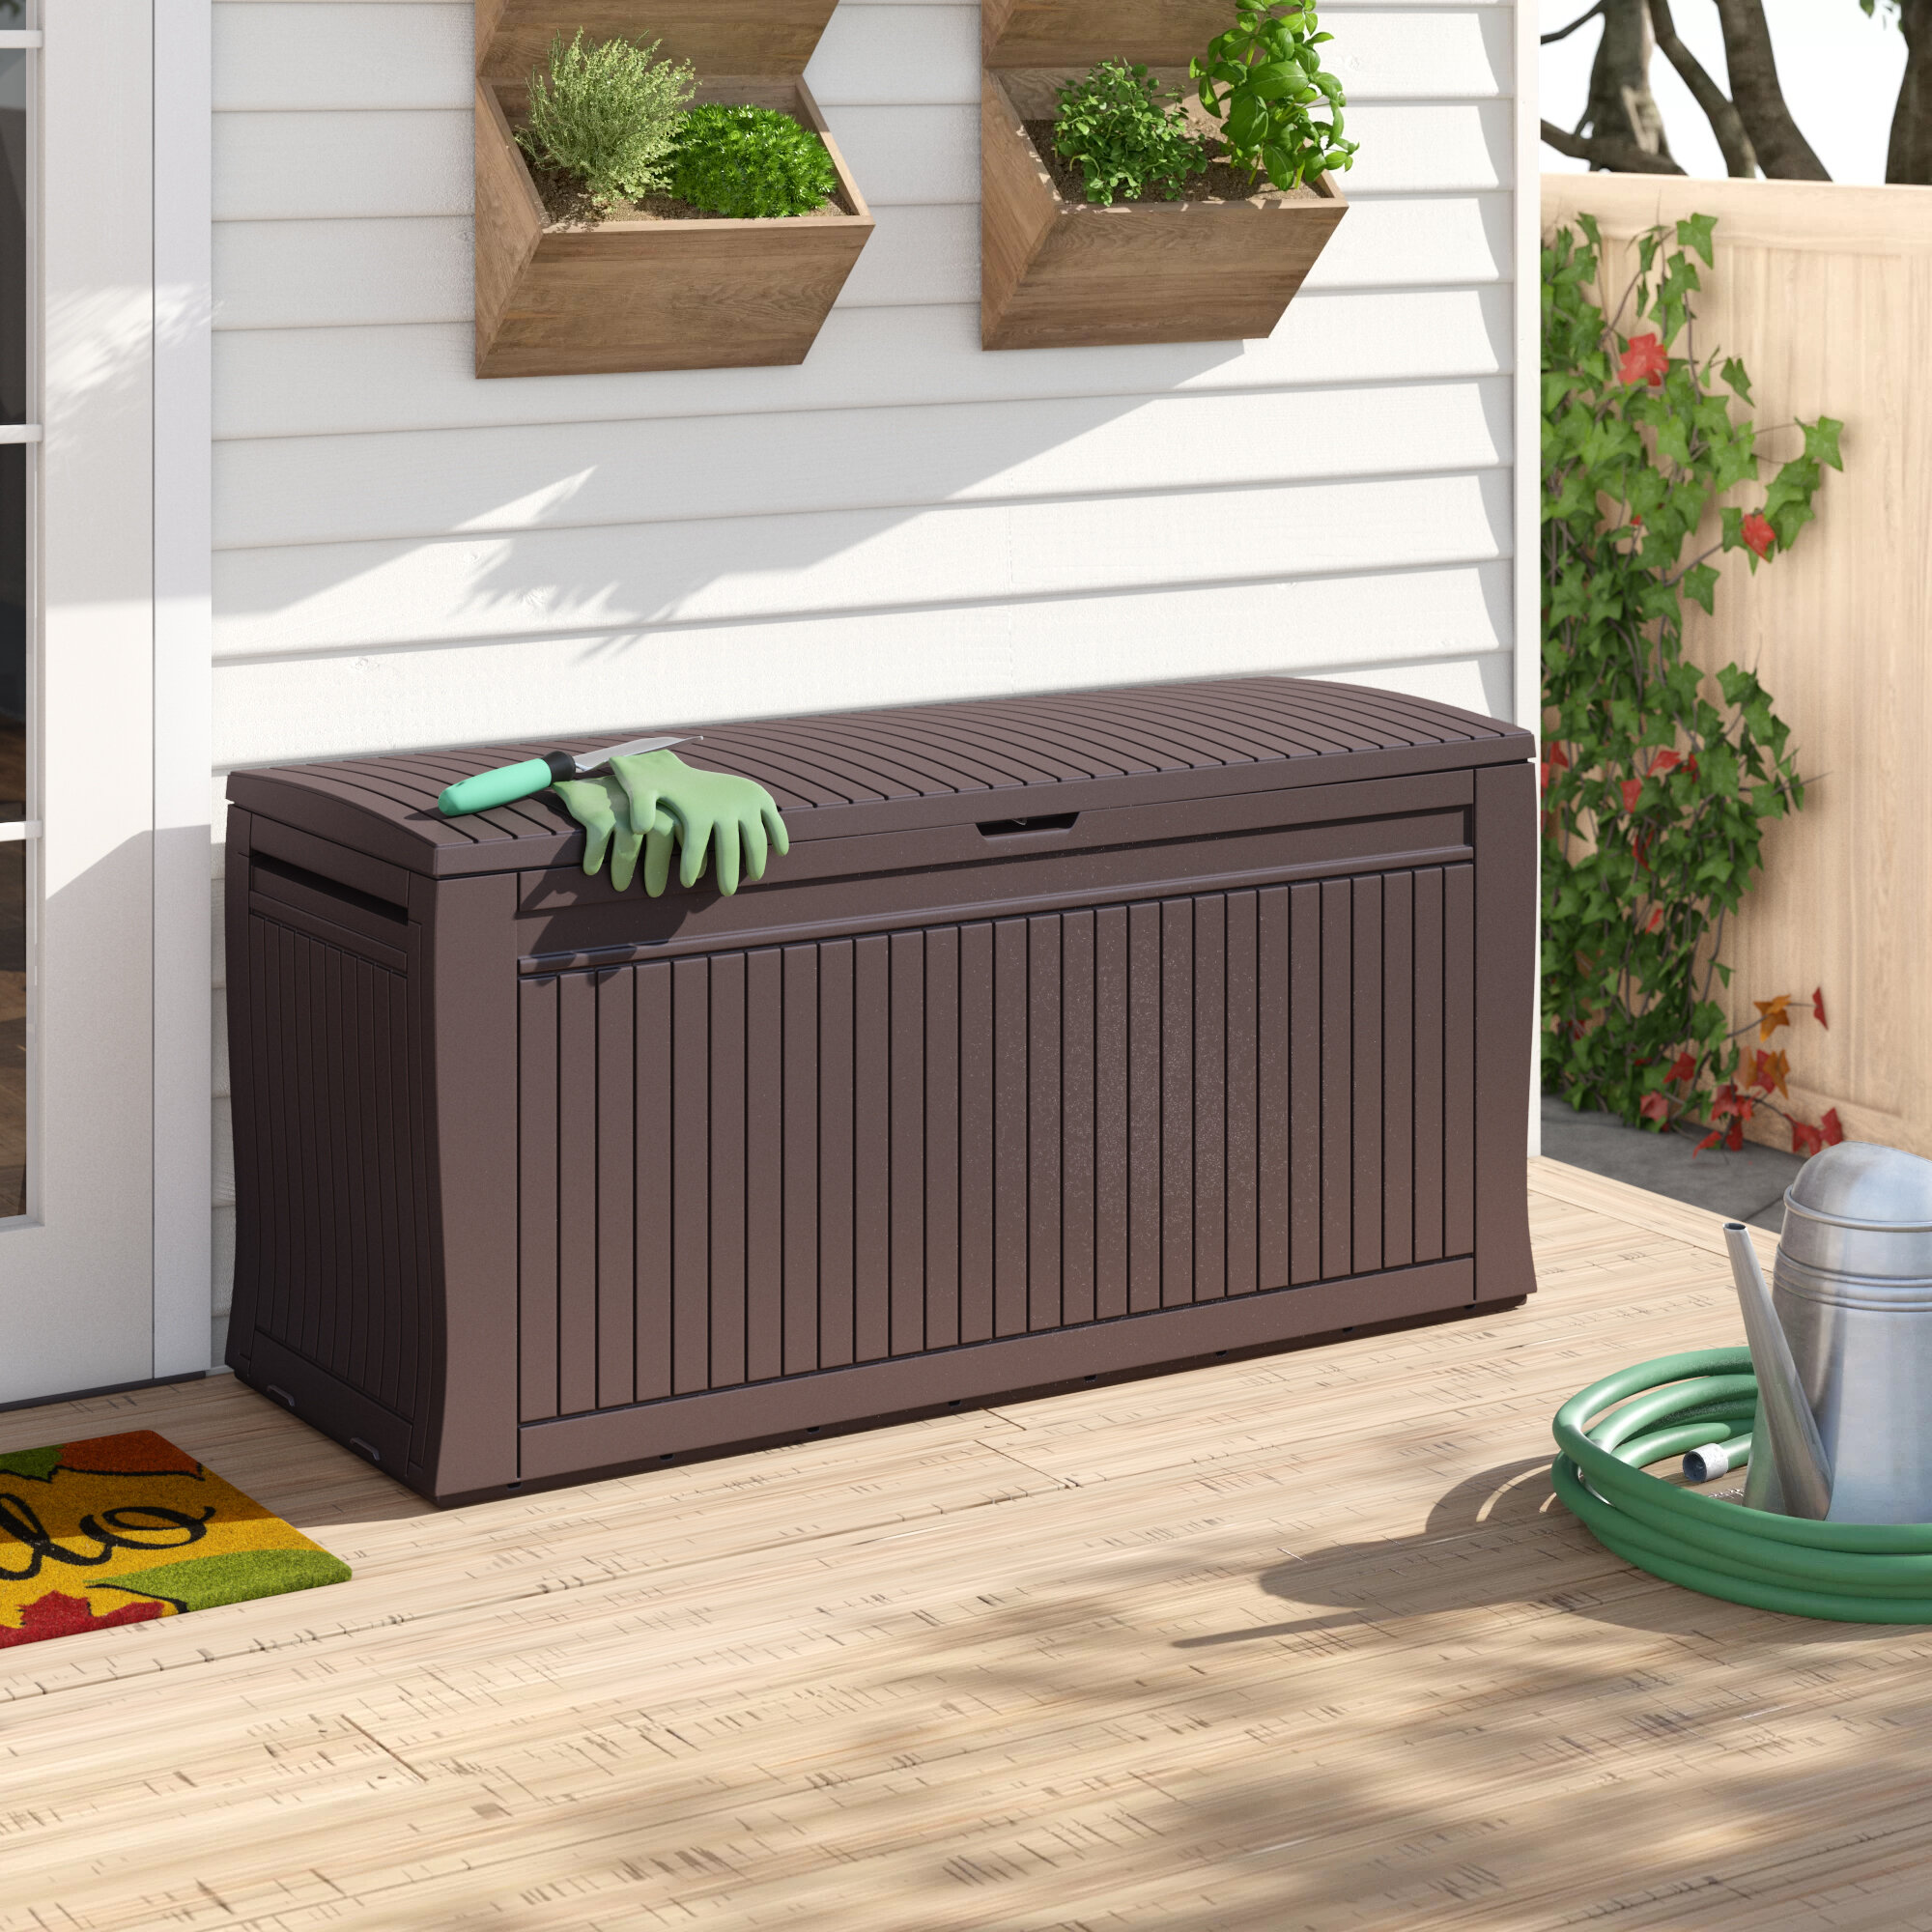 Details about   Outdoor Deck Box Storage Table 